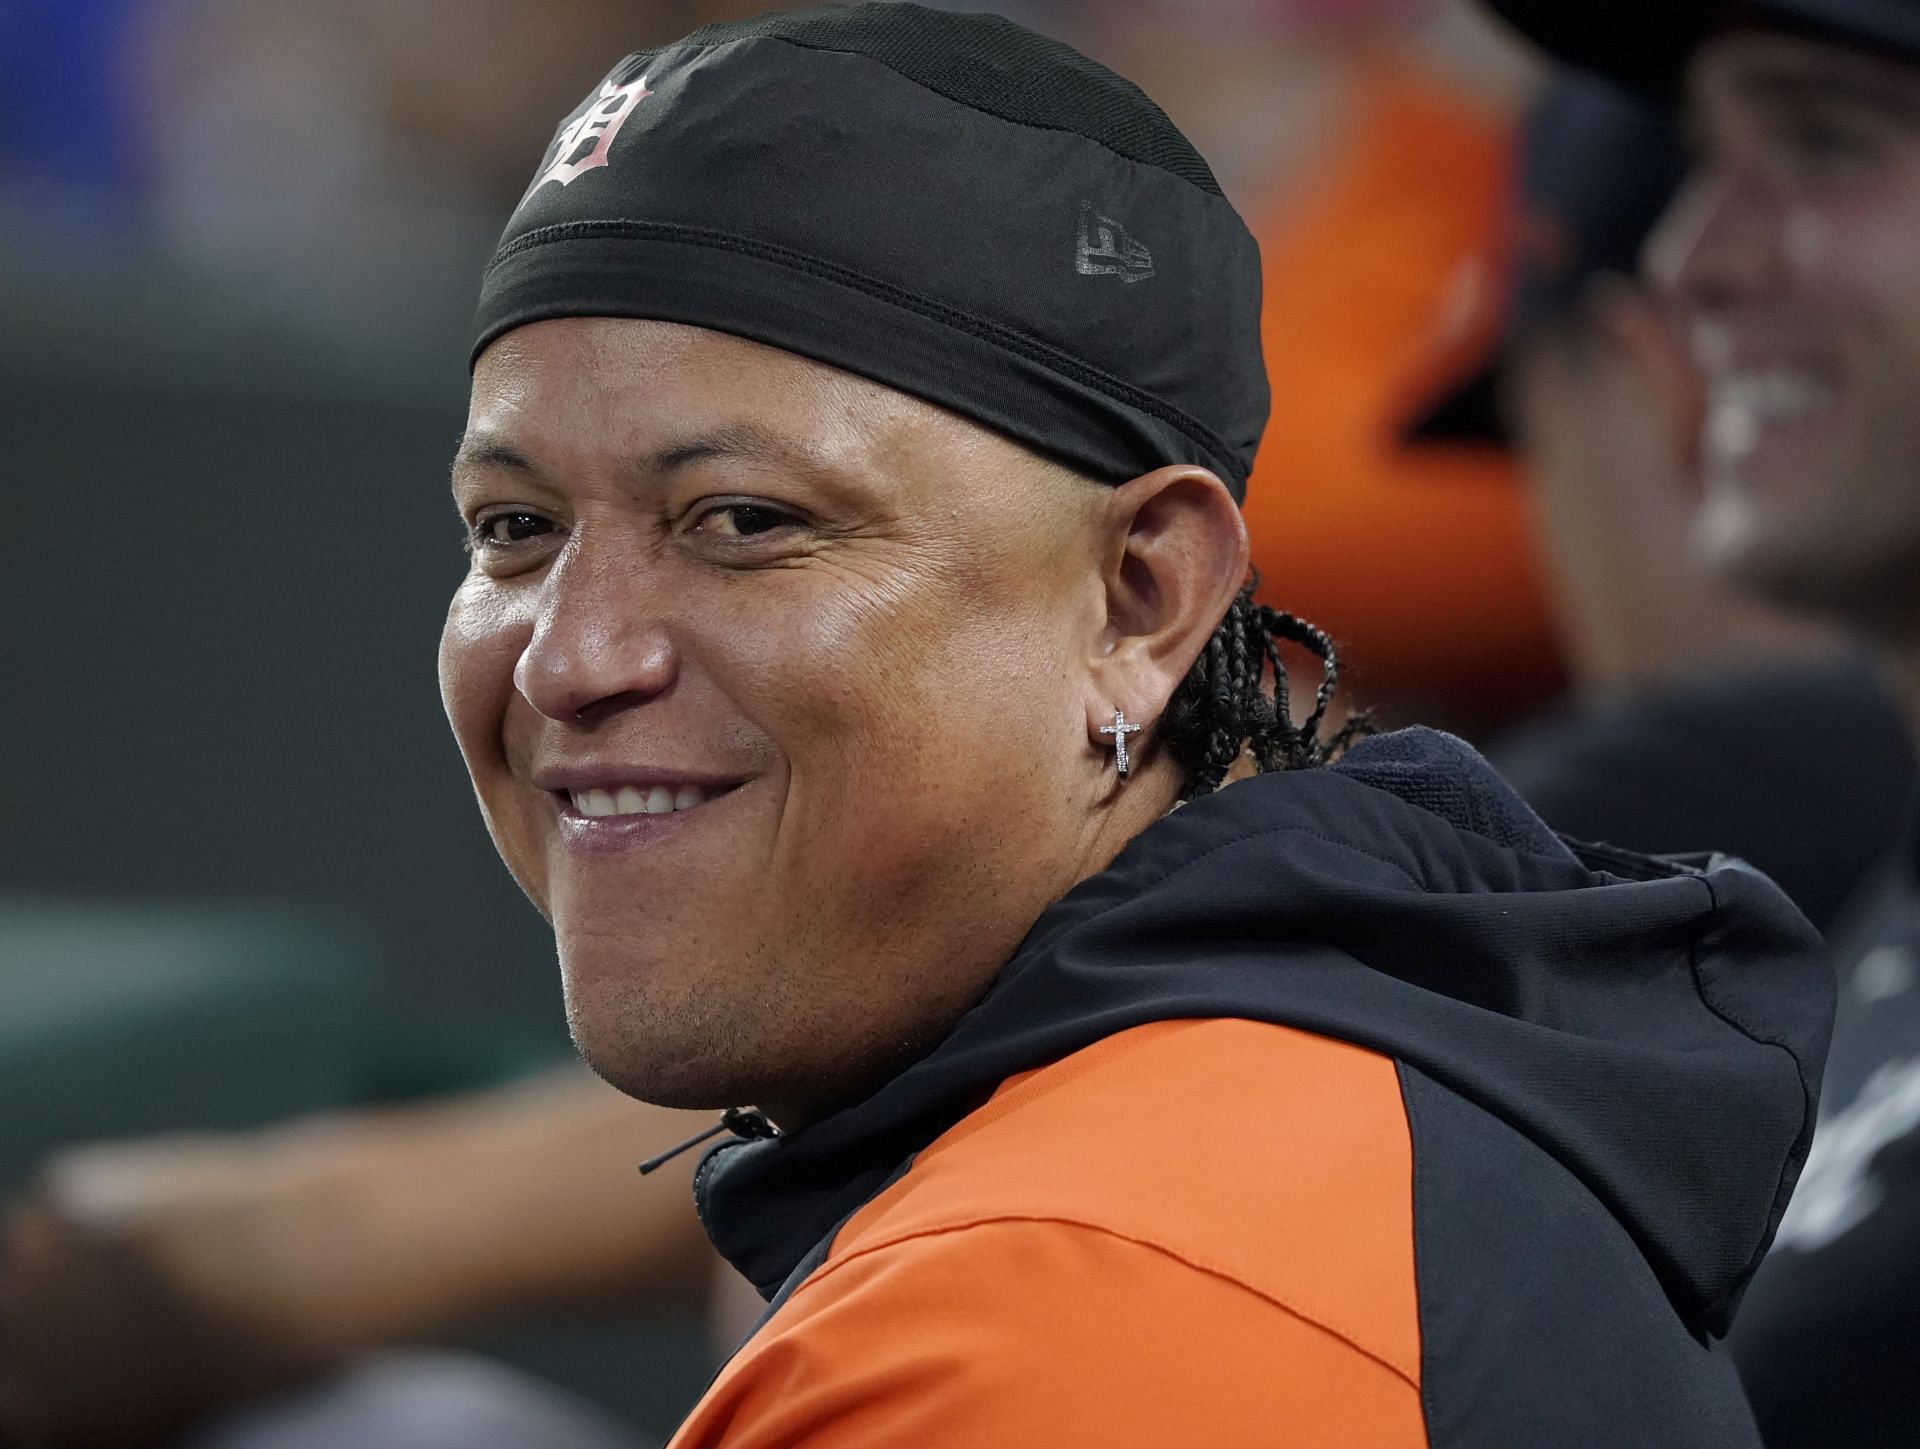 Miguel Cabrera of the Detroit Tigers watches from the dugout.